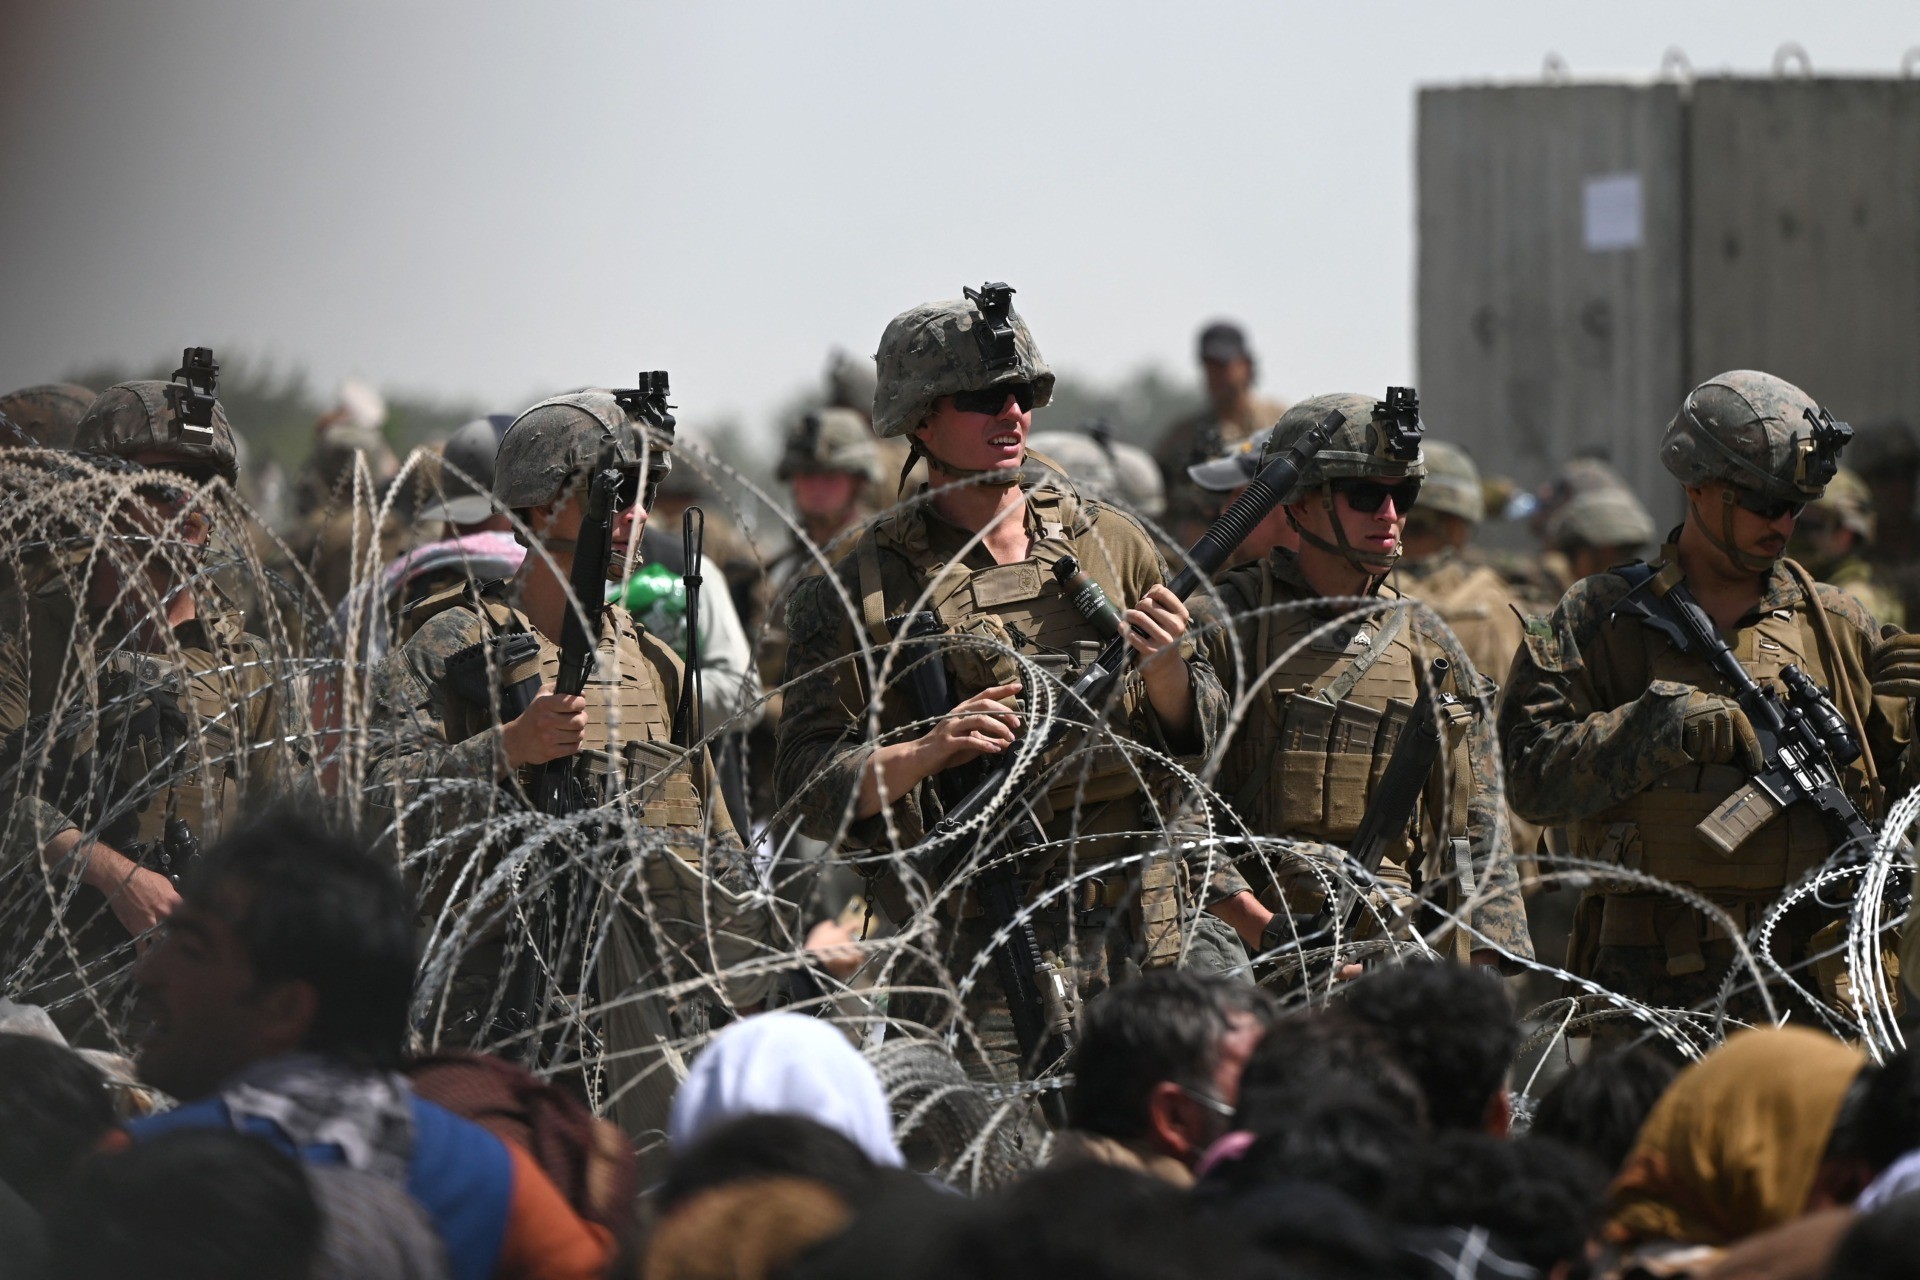 US soldiers stand guard behind barbed wire as Afghans sit on a street near the military wing of the airport in Kabul on August 20, 2021, hoping to leave the country after the Taliban took over Afghanistan.  (Photo by Wakil KOHSAR/AFP) (Photo by WAKIL KOHSAR/AFP via Getty Images)